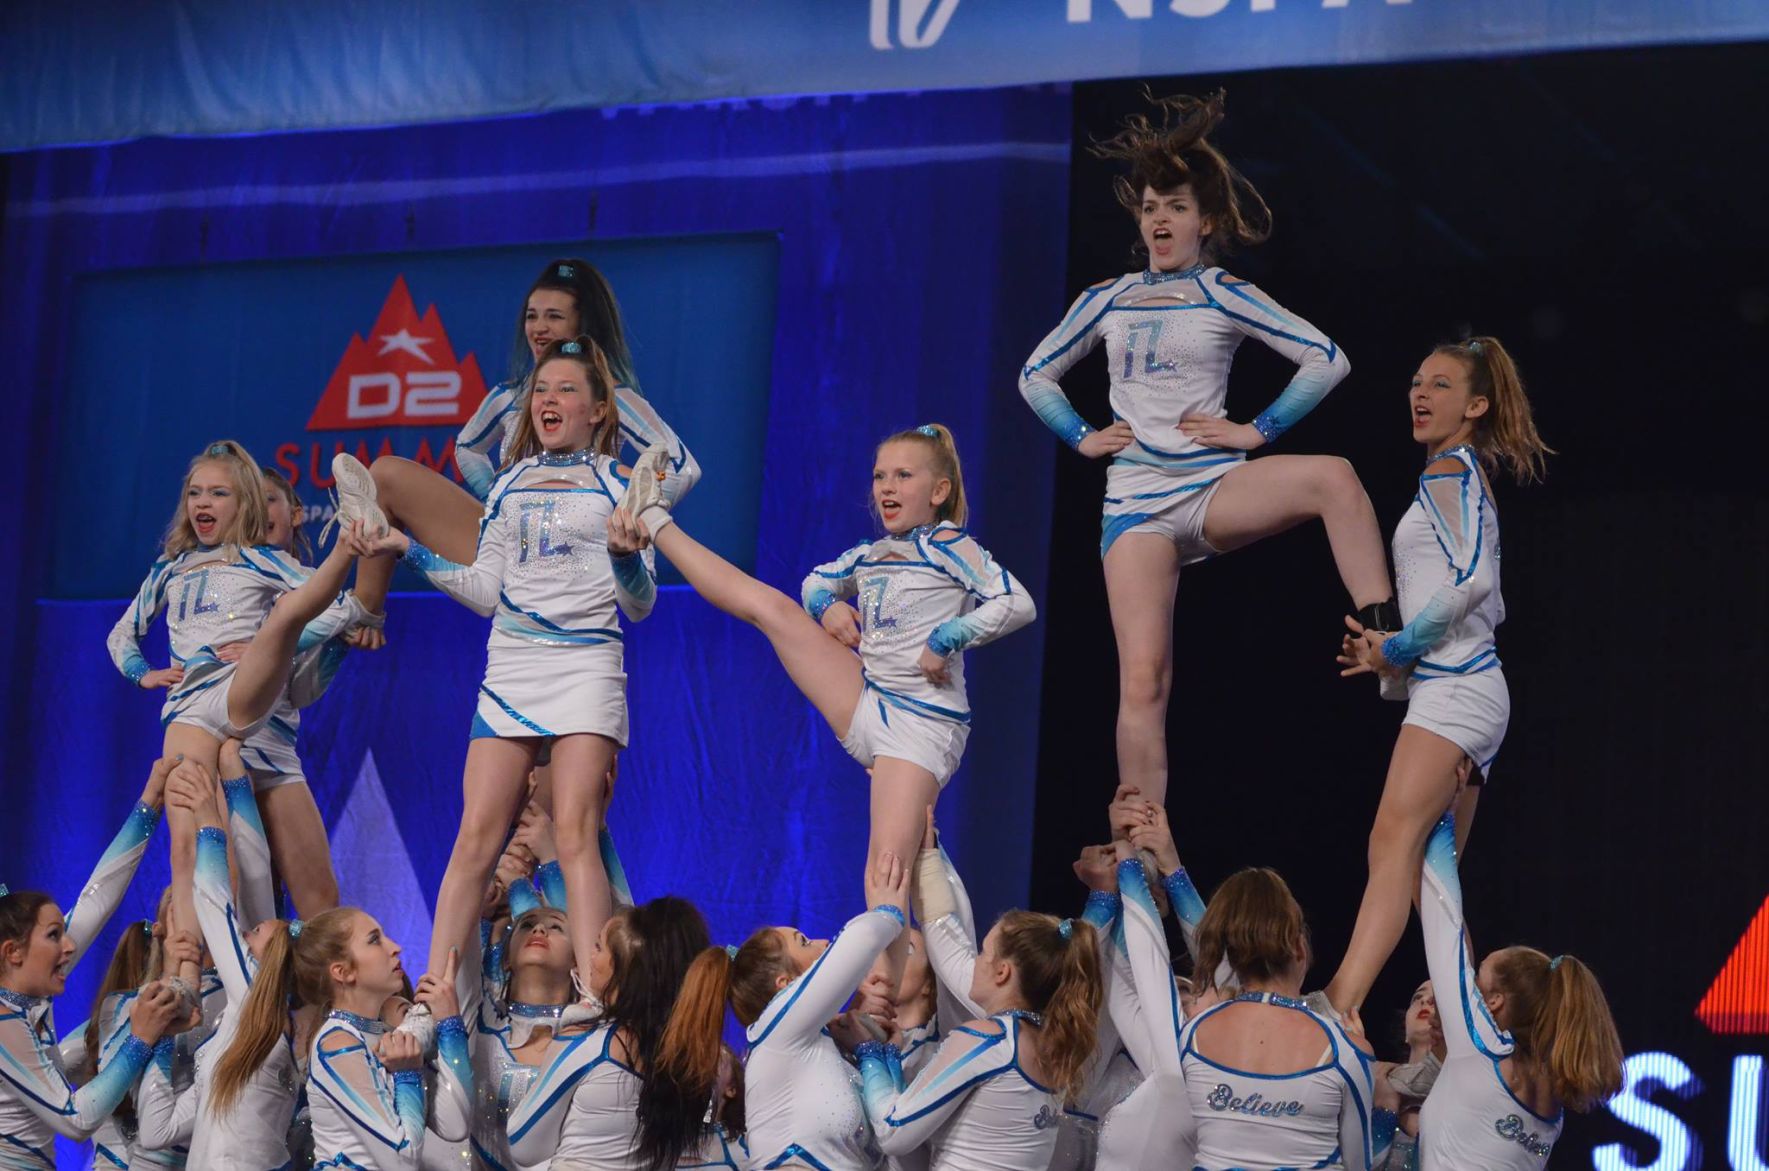 Northern Lights cheer brings home hardware from national